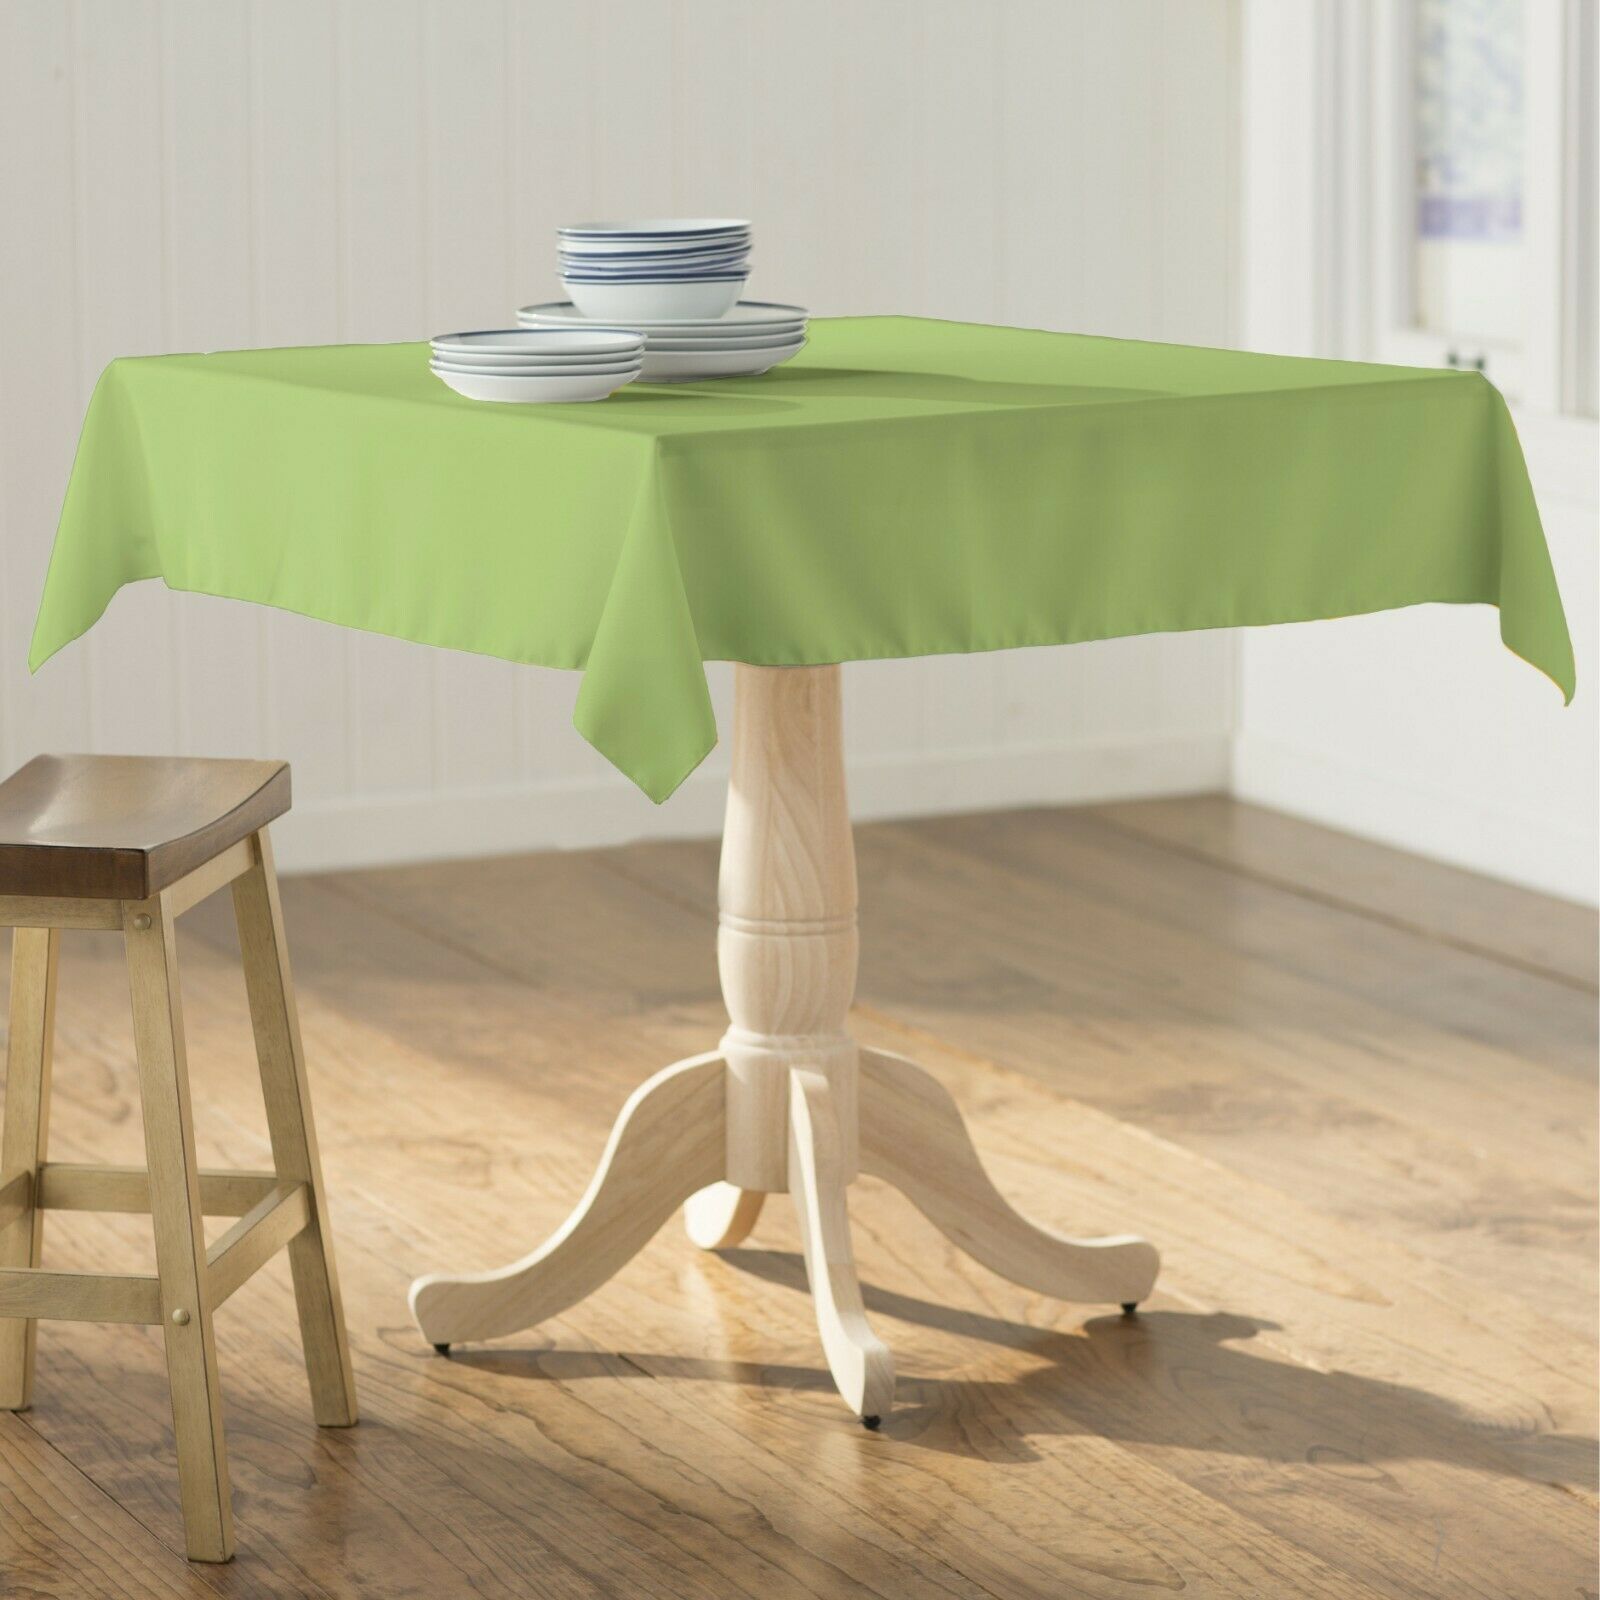 La Linen Polyester Poplin Square Tablecloth, 52 By 52-inch. Made In Usa